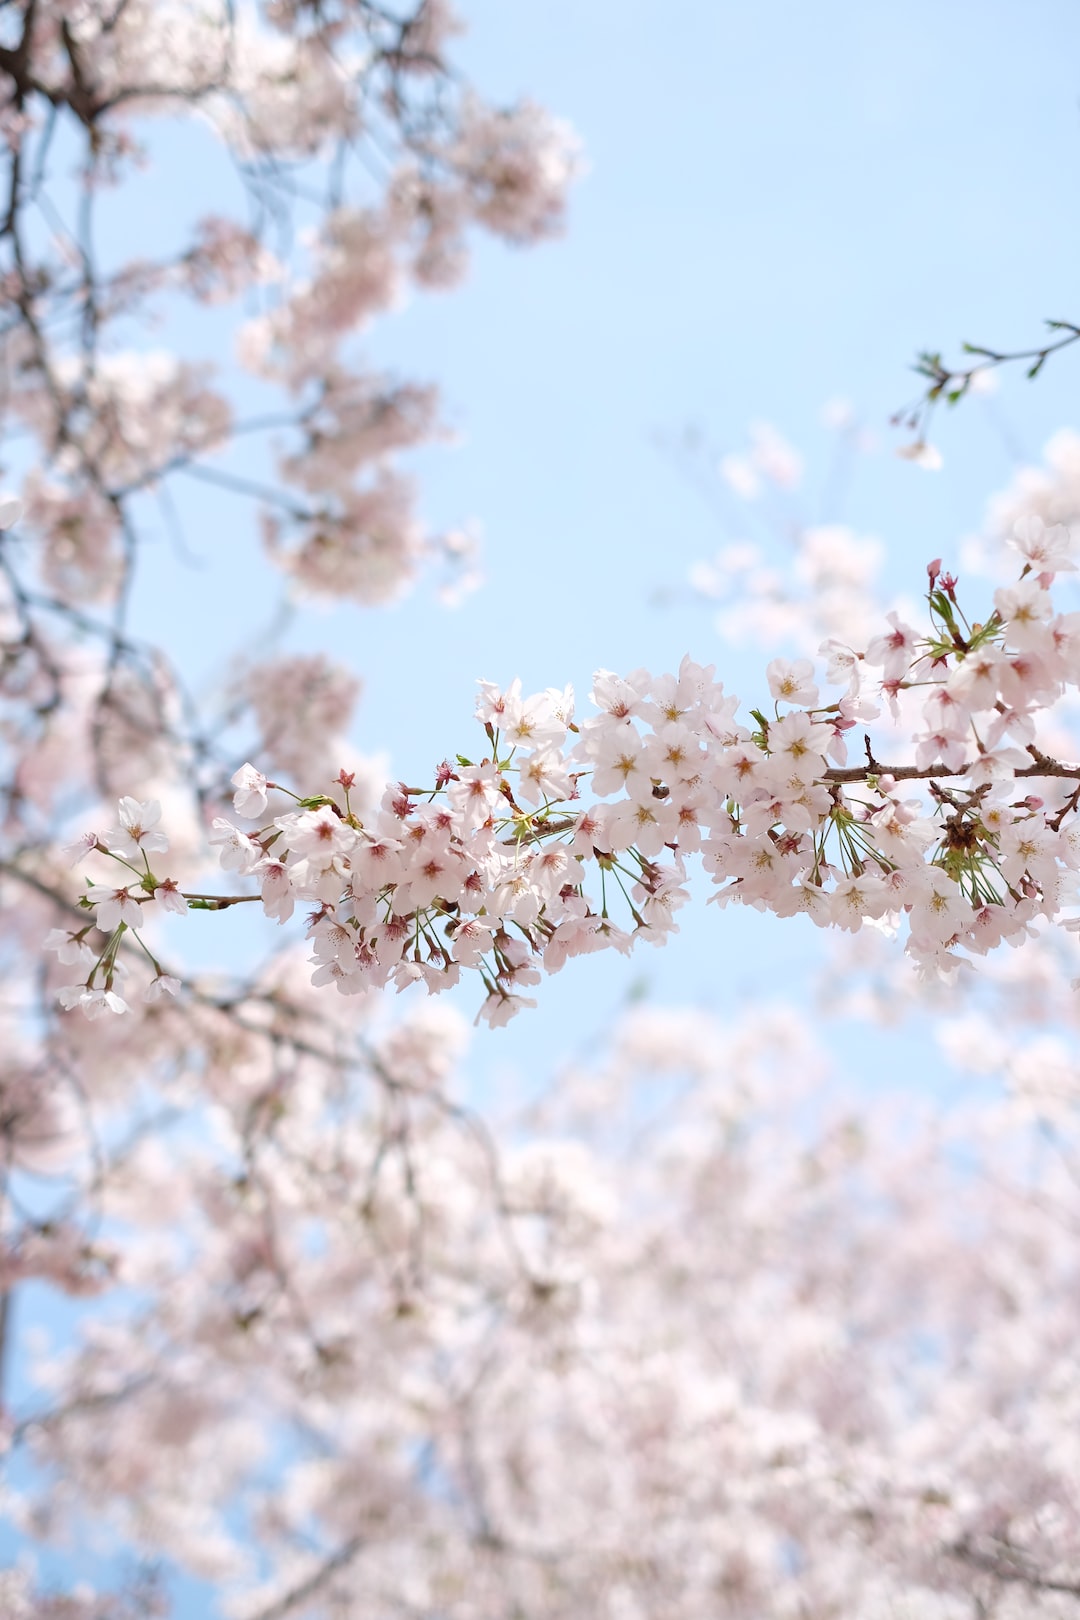 I took this photo on my first trip to South Korea. I came to the cherry blossom festival in Jinhae, South Korea, and almost every shot I took there are perfectly great, and this is one of all my shots.